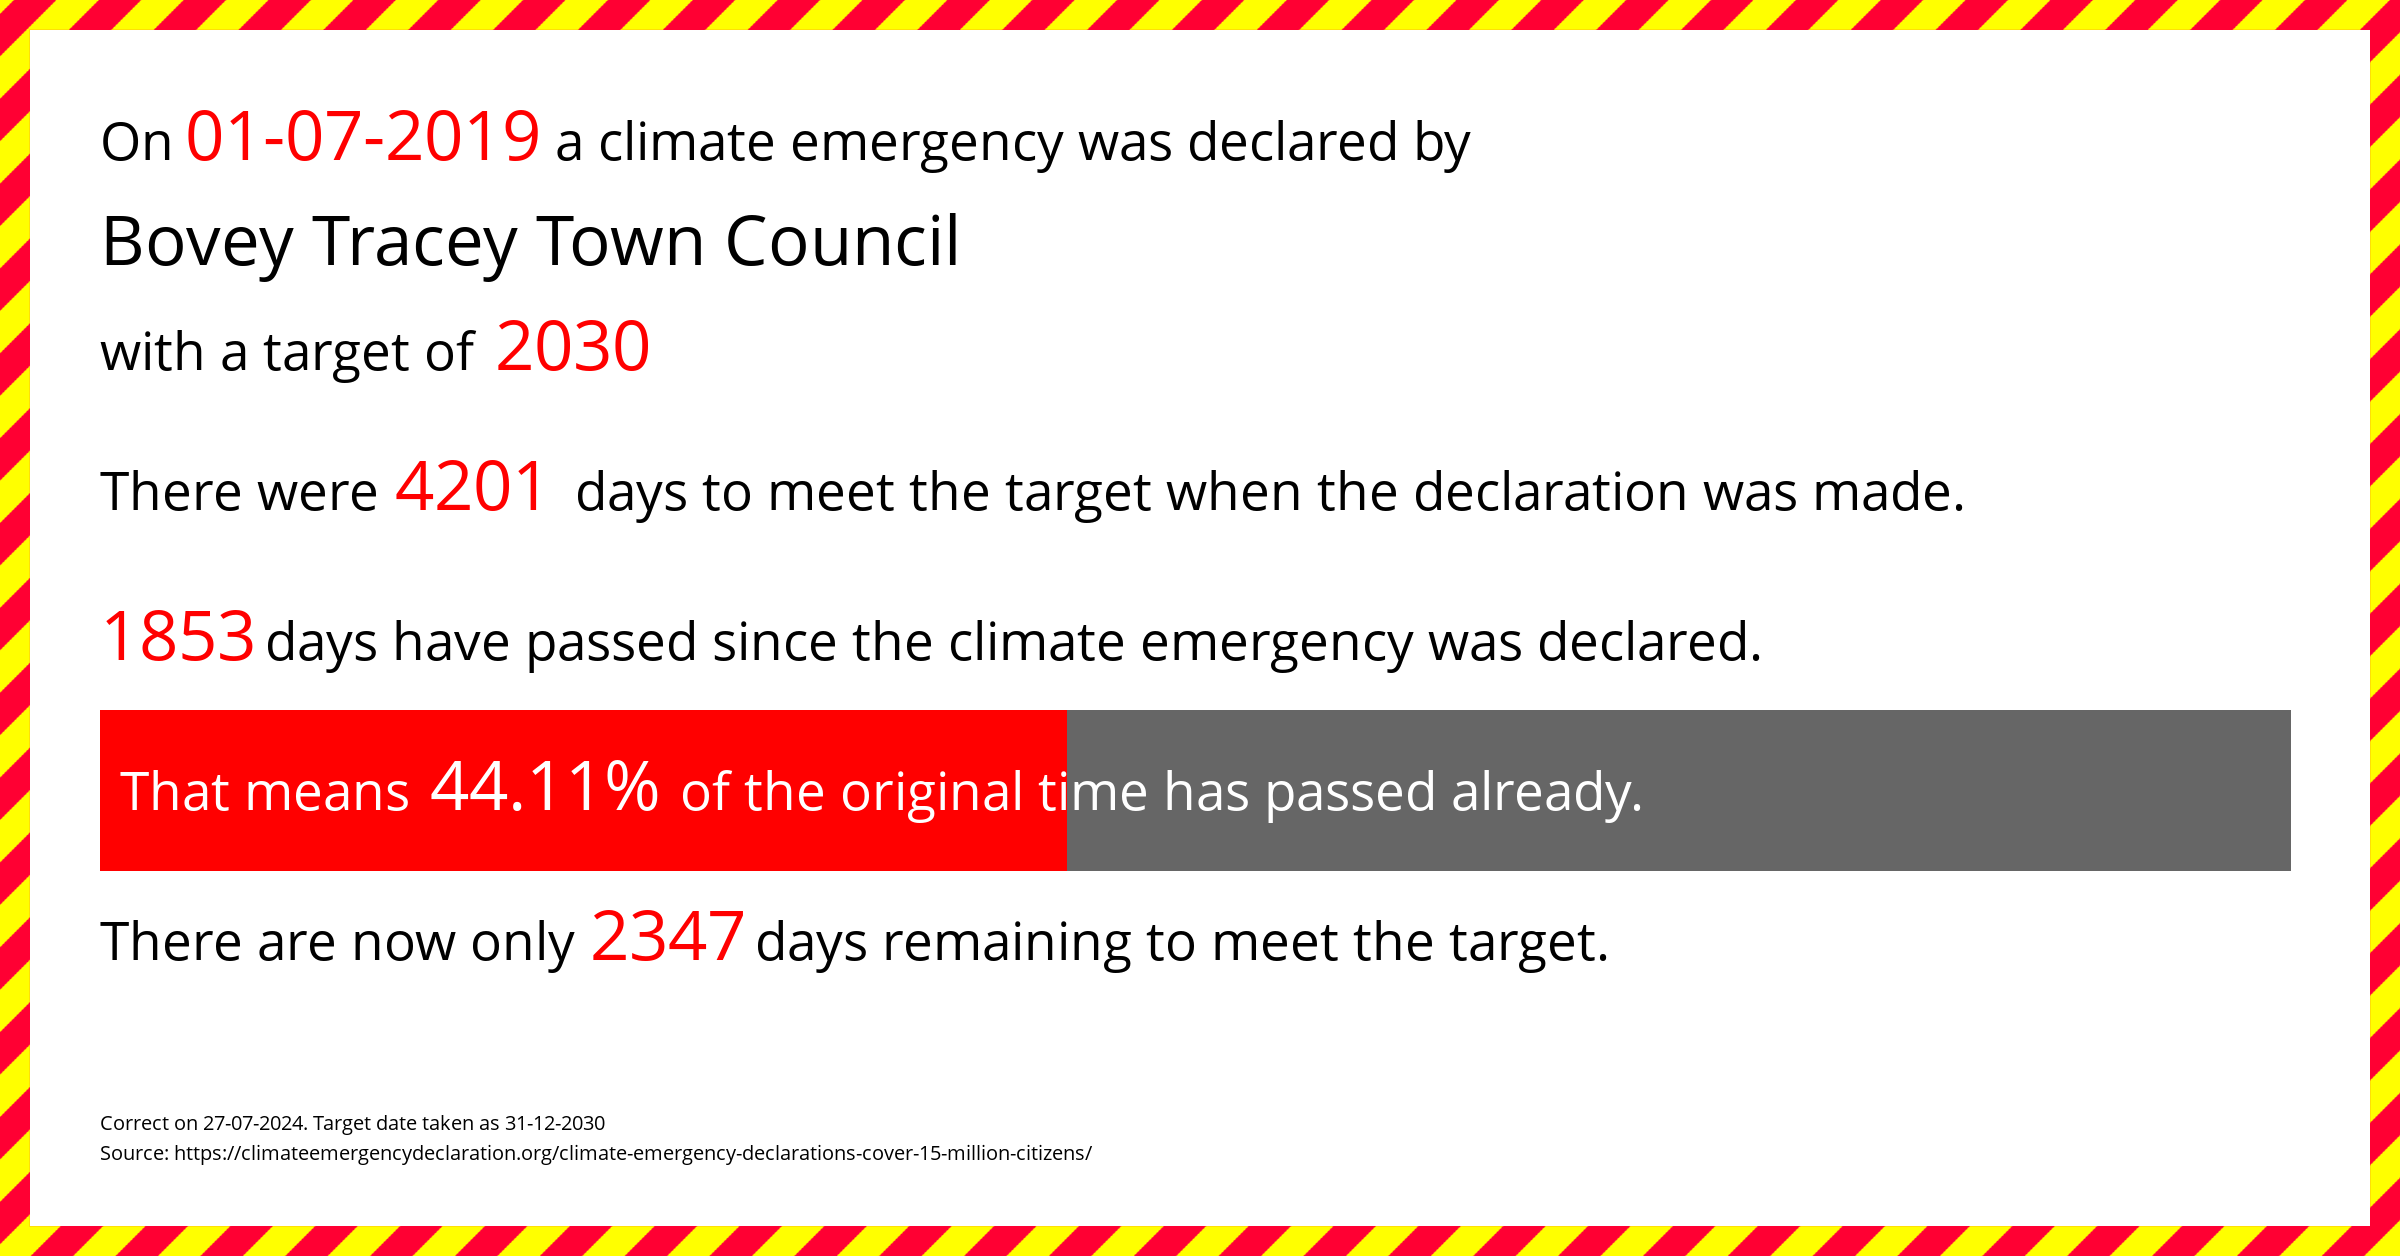 Bovey Tracey Town Council declared a Climate emergency on Monday 1st July 2019, with a target of 2030.